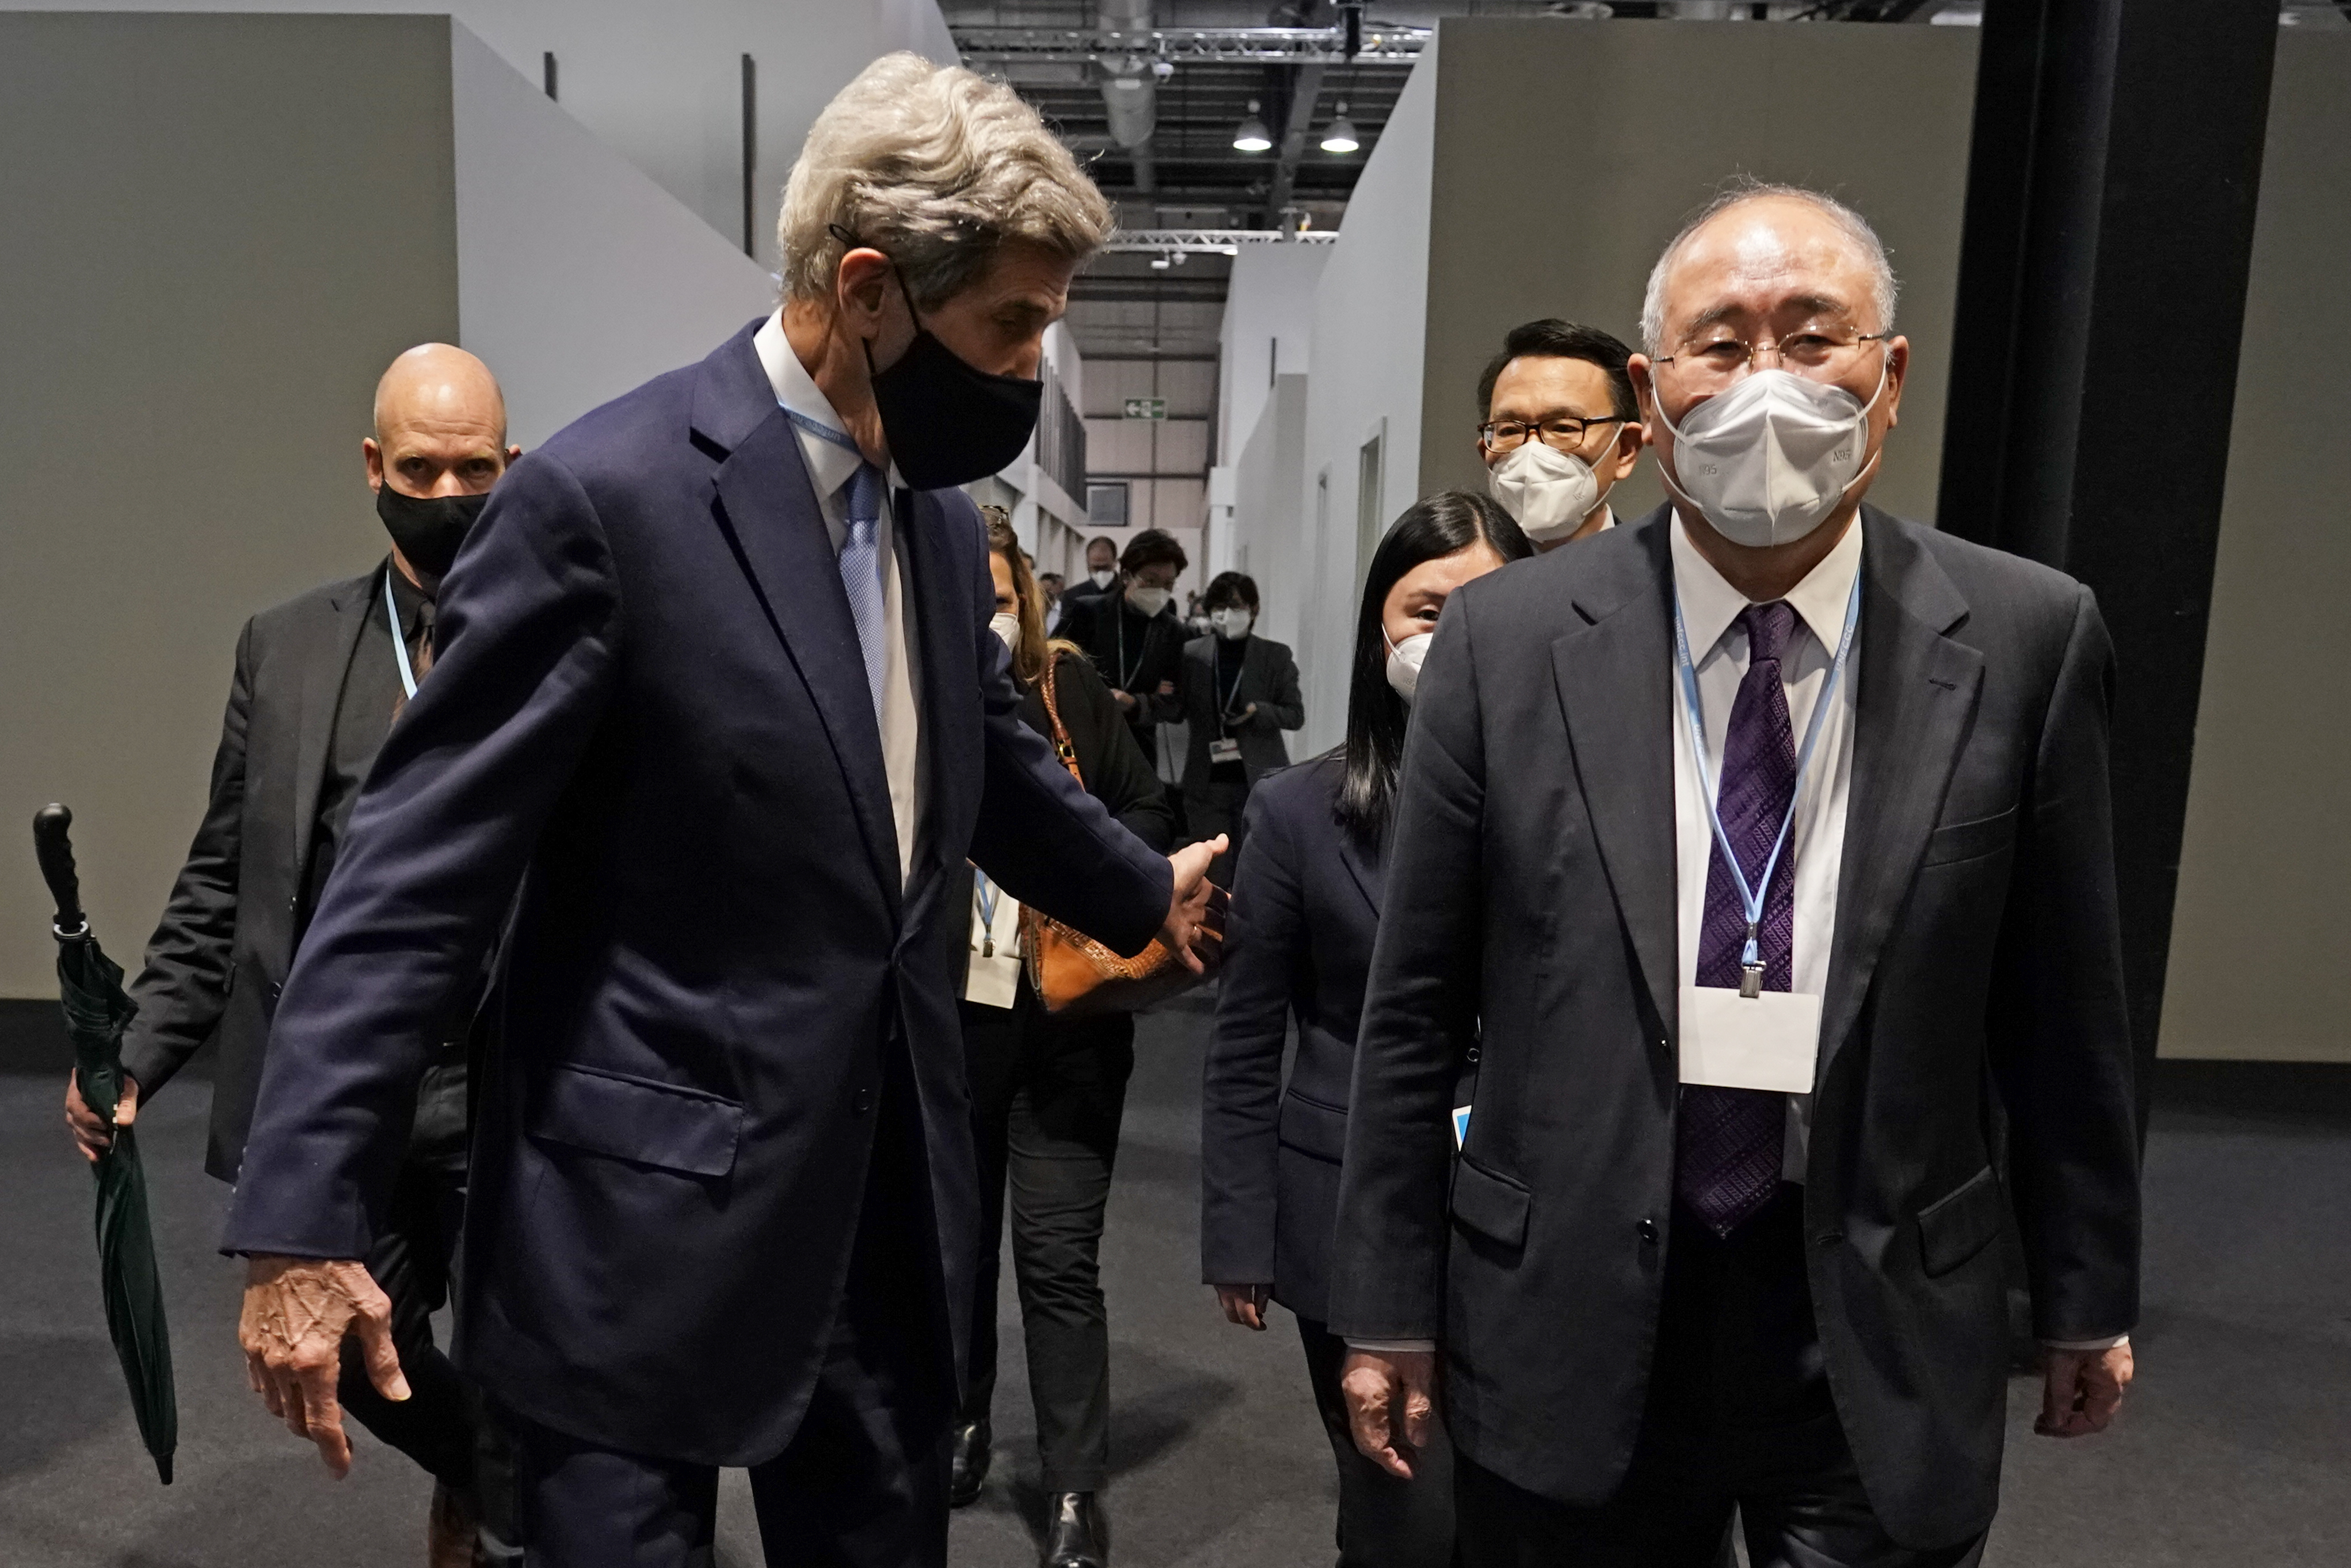 China's special envoy for climate change Xie Zhenhua, right, walks with John Kerry, United States Special Presidential Envoy for Climate at the COP26 U.N. Climate Summit in Glasgow, Scotland, Nov. 12, 2021. /AP